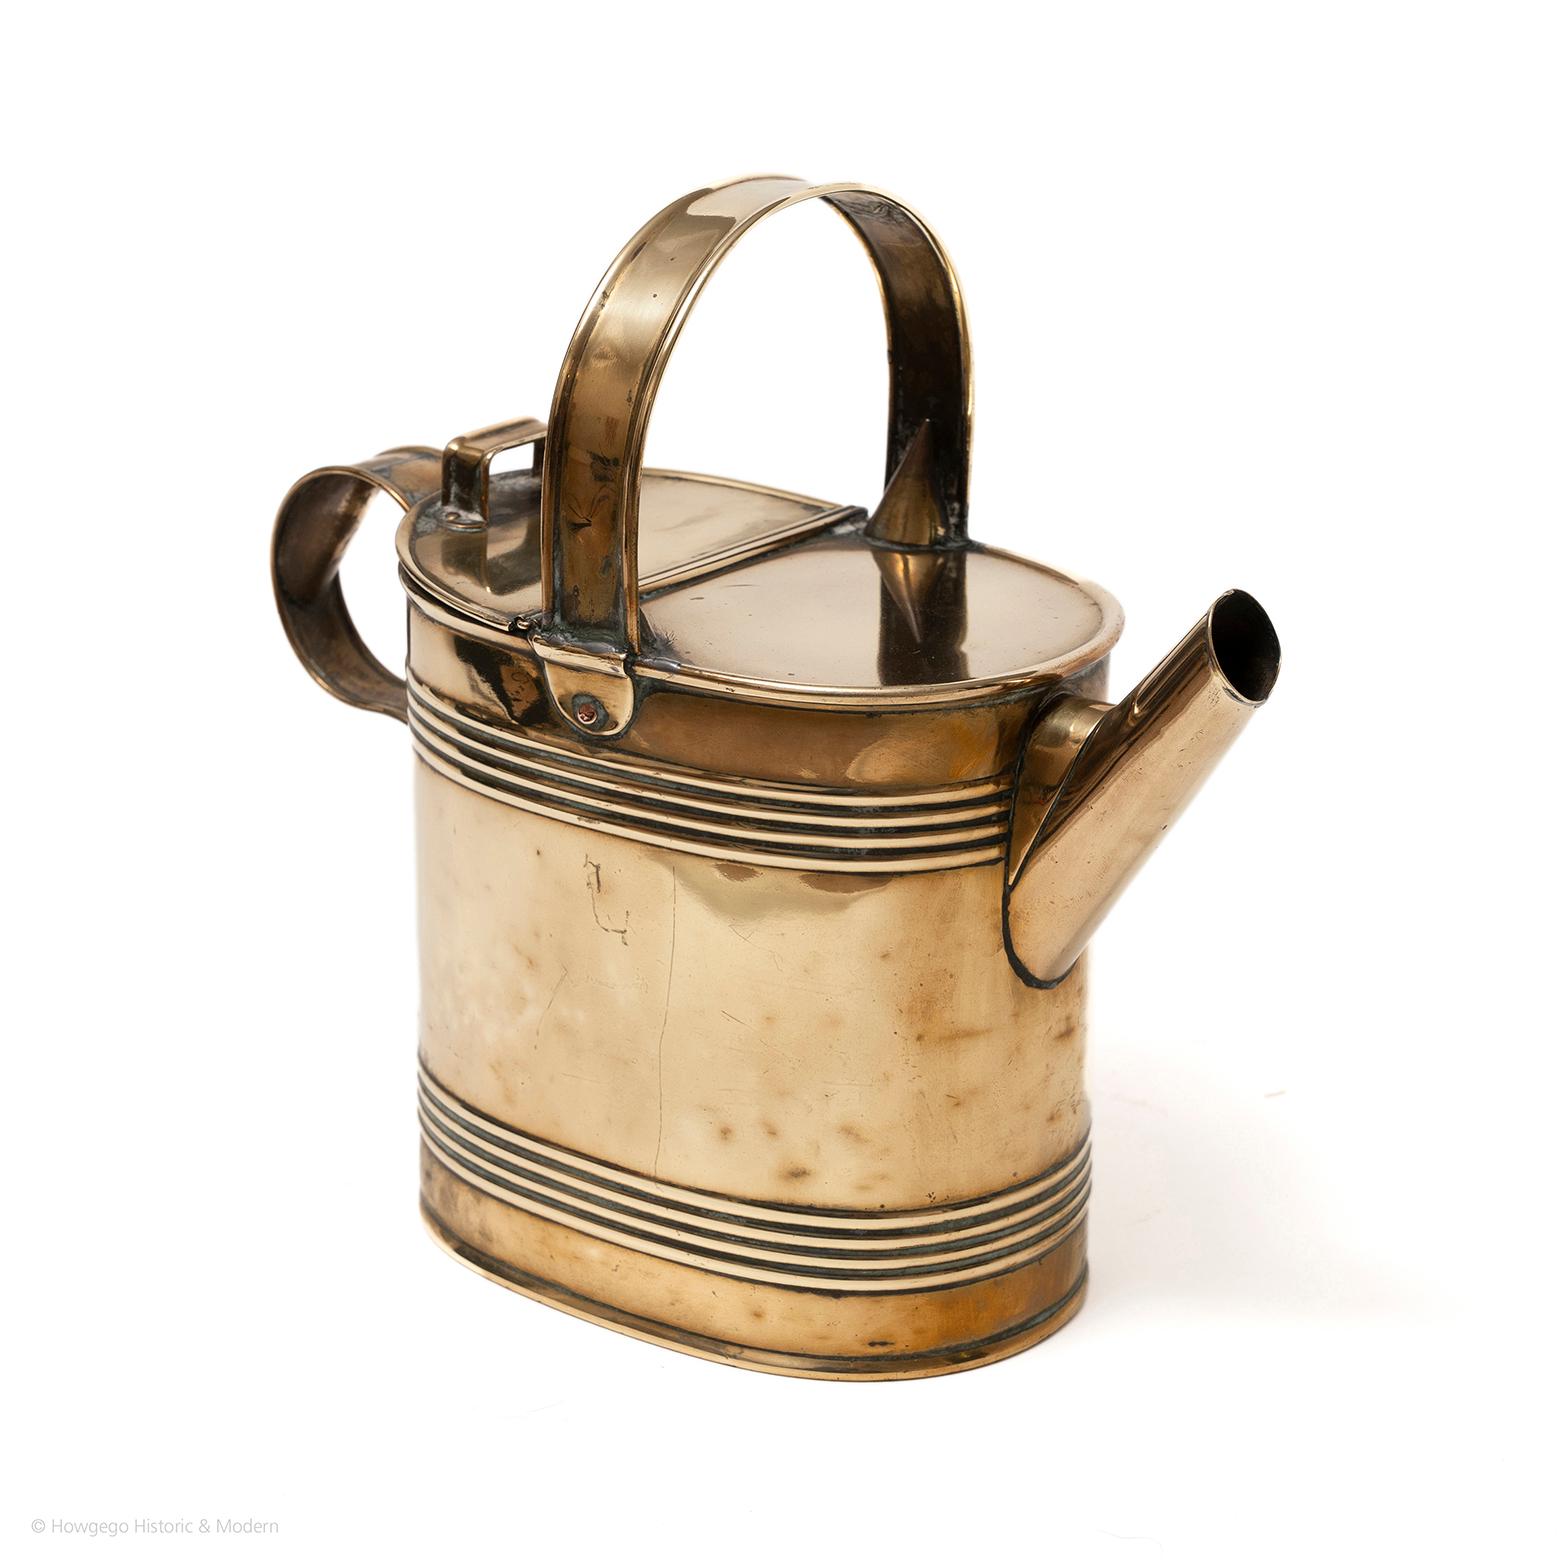 Perfect size for house plants, seeds or carrying hot water.
Beautiful collectors item or decorative object.

A fine Victorian oval, brass watering can or hot water jug. Upper brass handle across top, back section of the top hinged to pour in